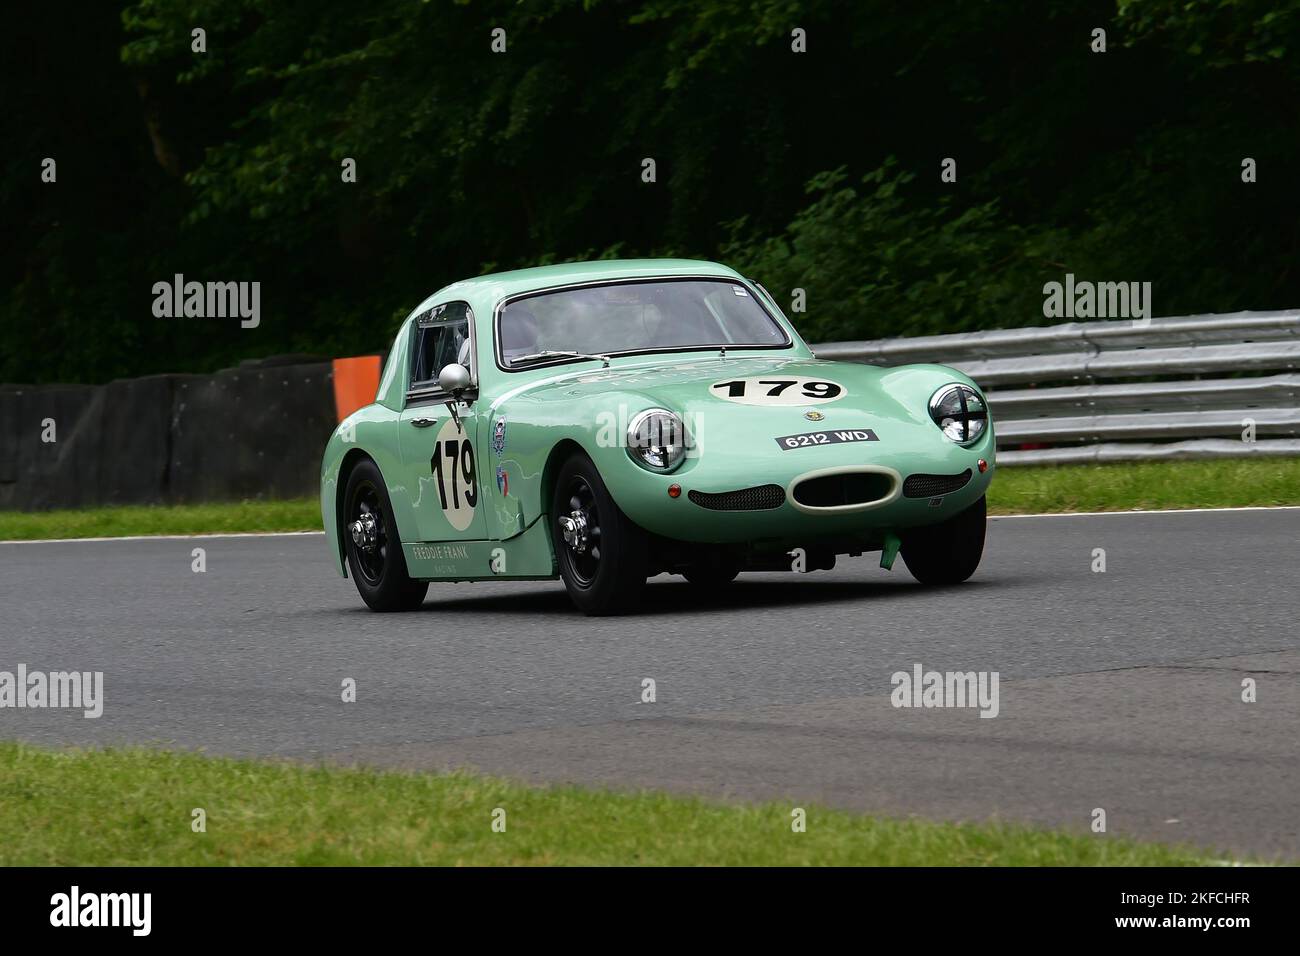 Samuel Ashby, Austin Sprite, Equipe Libre, Equipe GTS, a forty minute race for pre-66 race cars compliant to FIA Appendix K running on historic CR65L Stock Photo